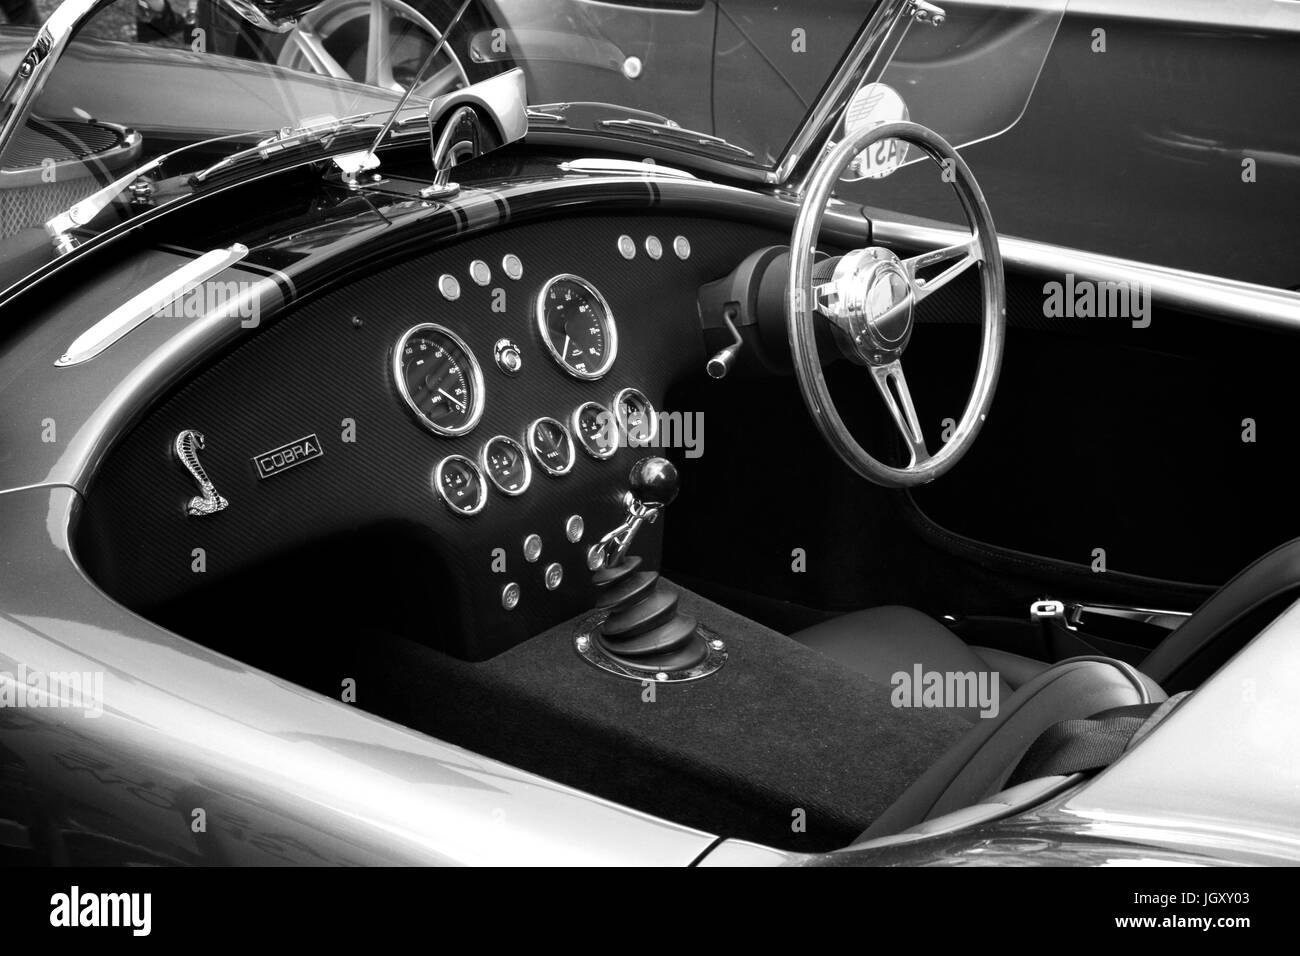 Monochrome of the drivers cockpit of an AC Cobra classic sports car showing dashboard instruments and steering wheel. Stock Photo